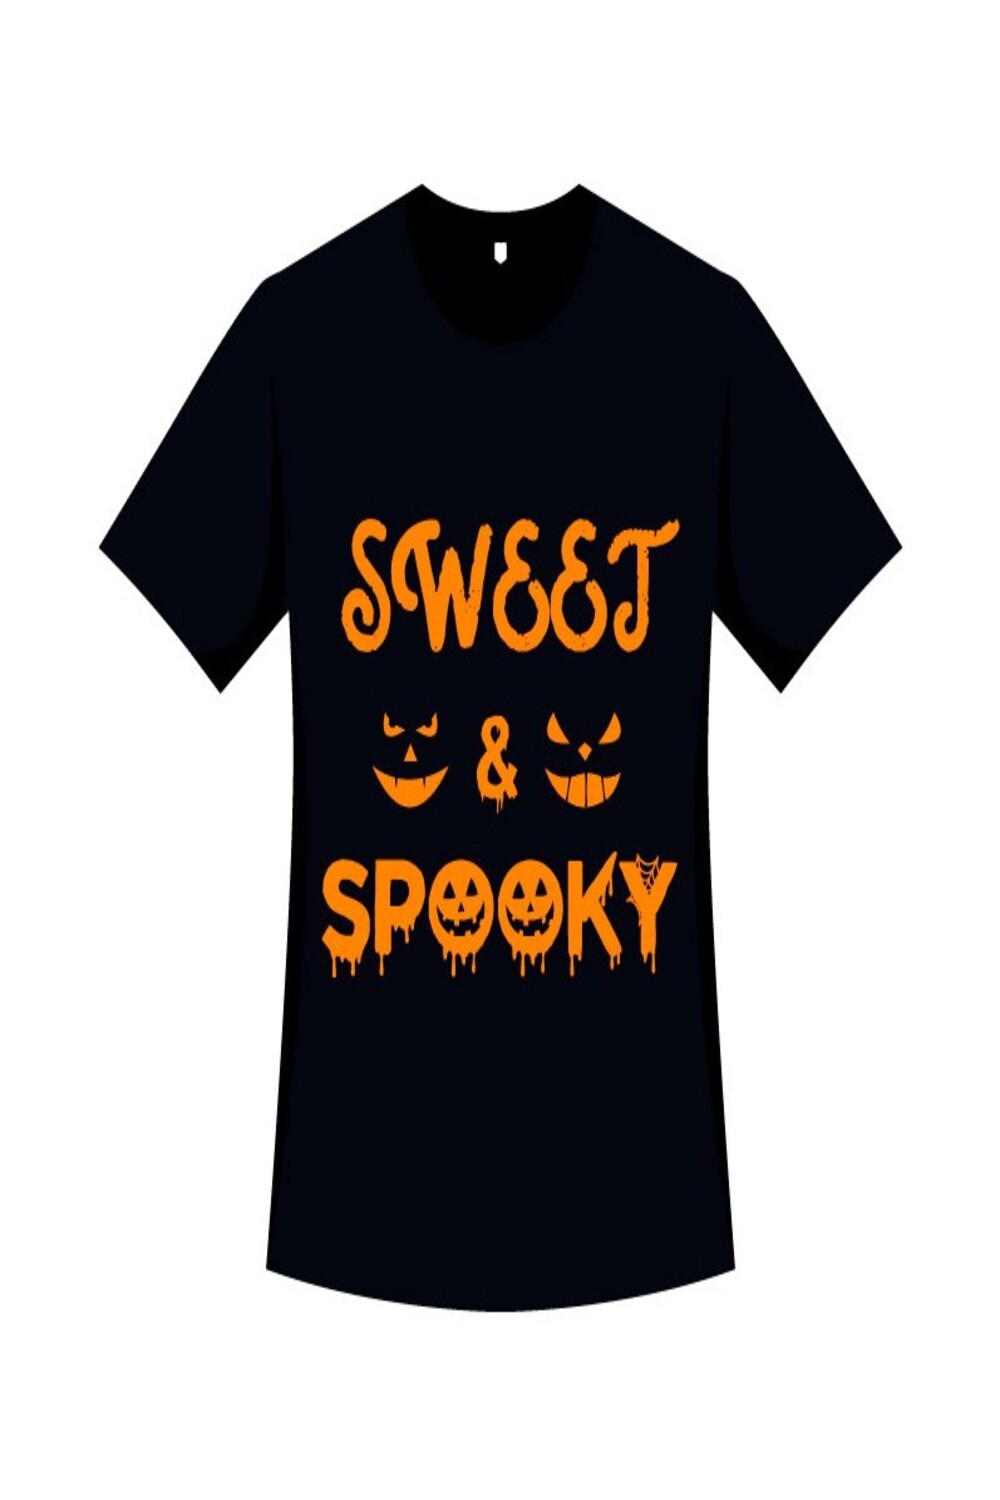 Black T-shirt with orange lettering Sweet Spooky.